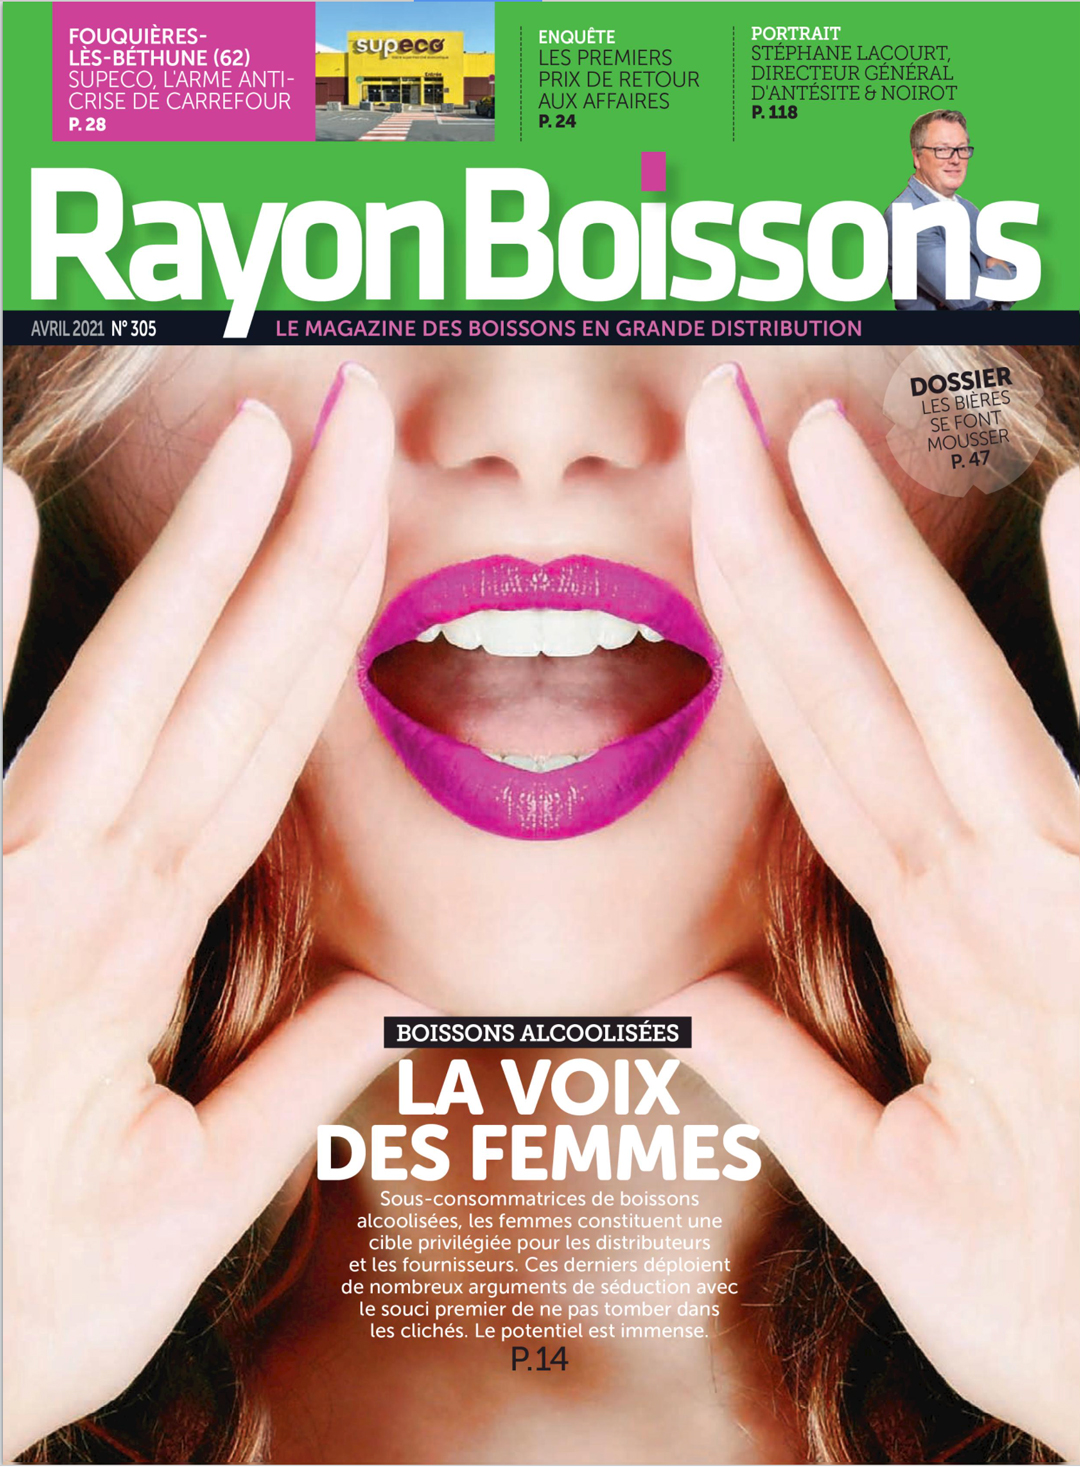 Couverture Rayon Boissons N°305 Avril 2021